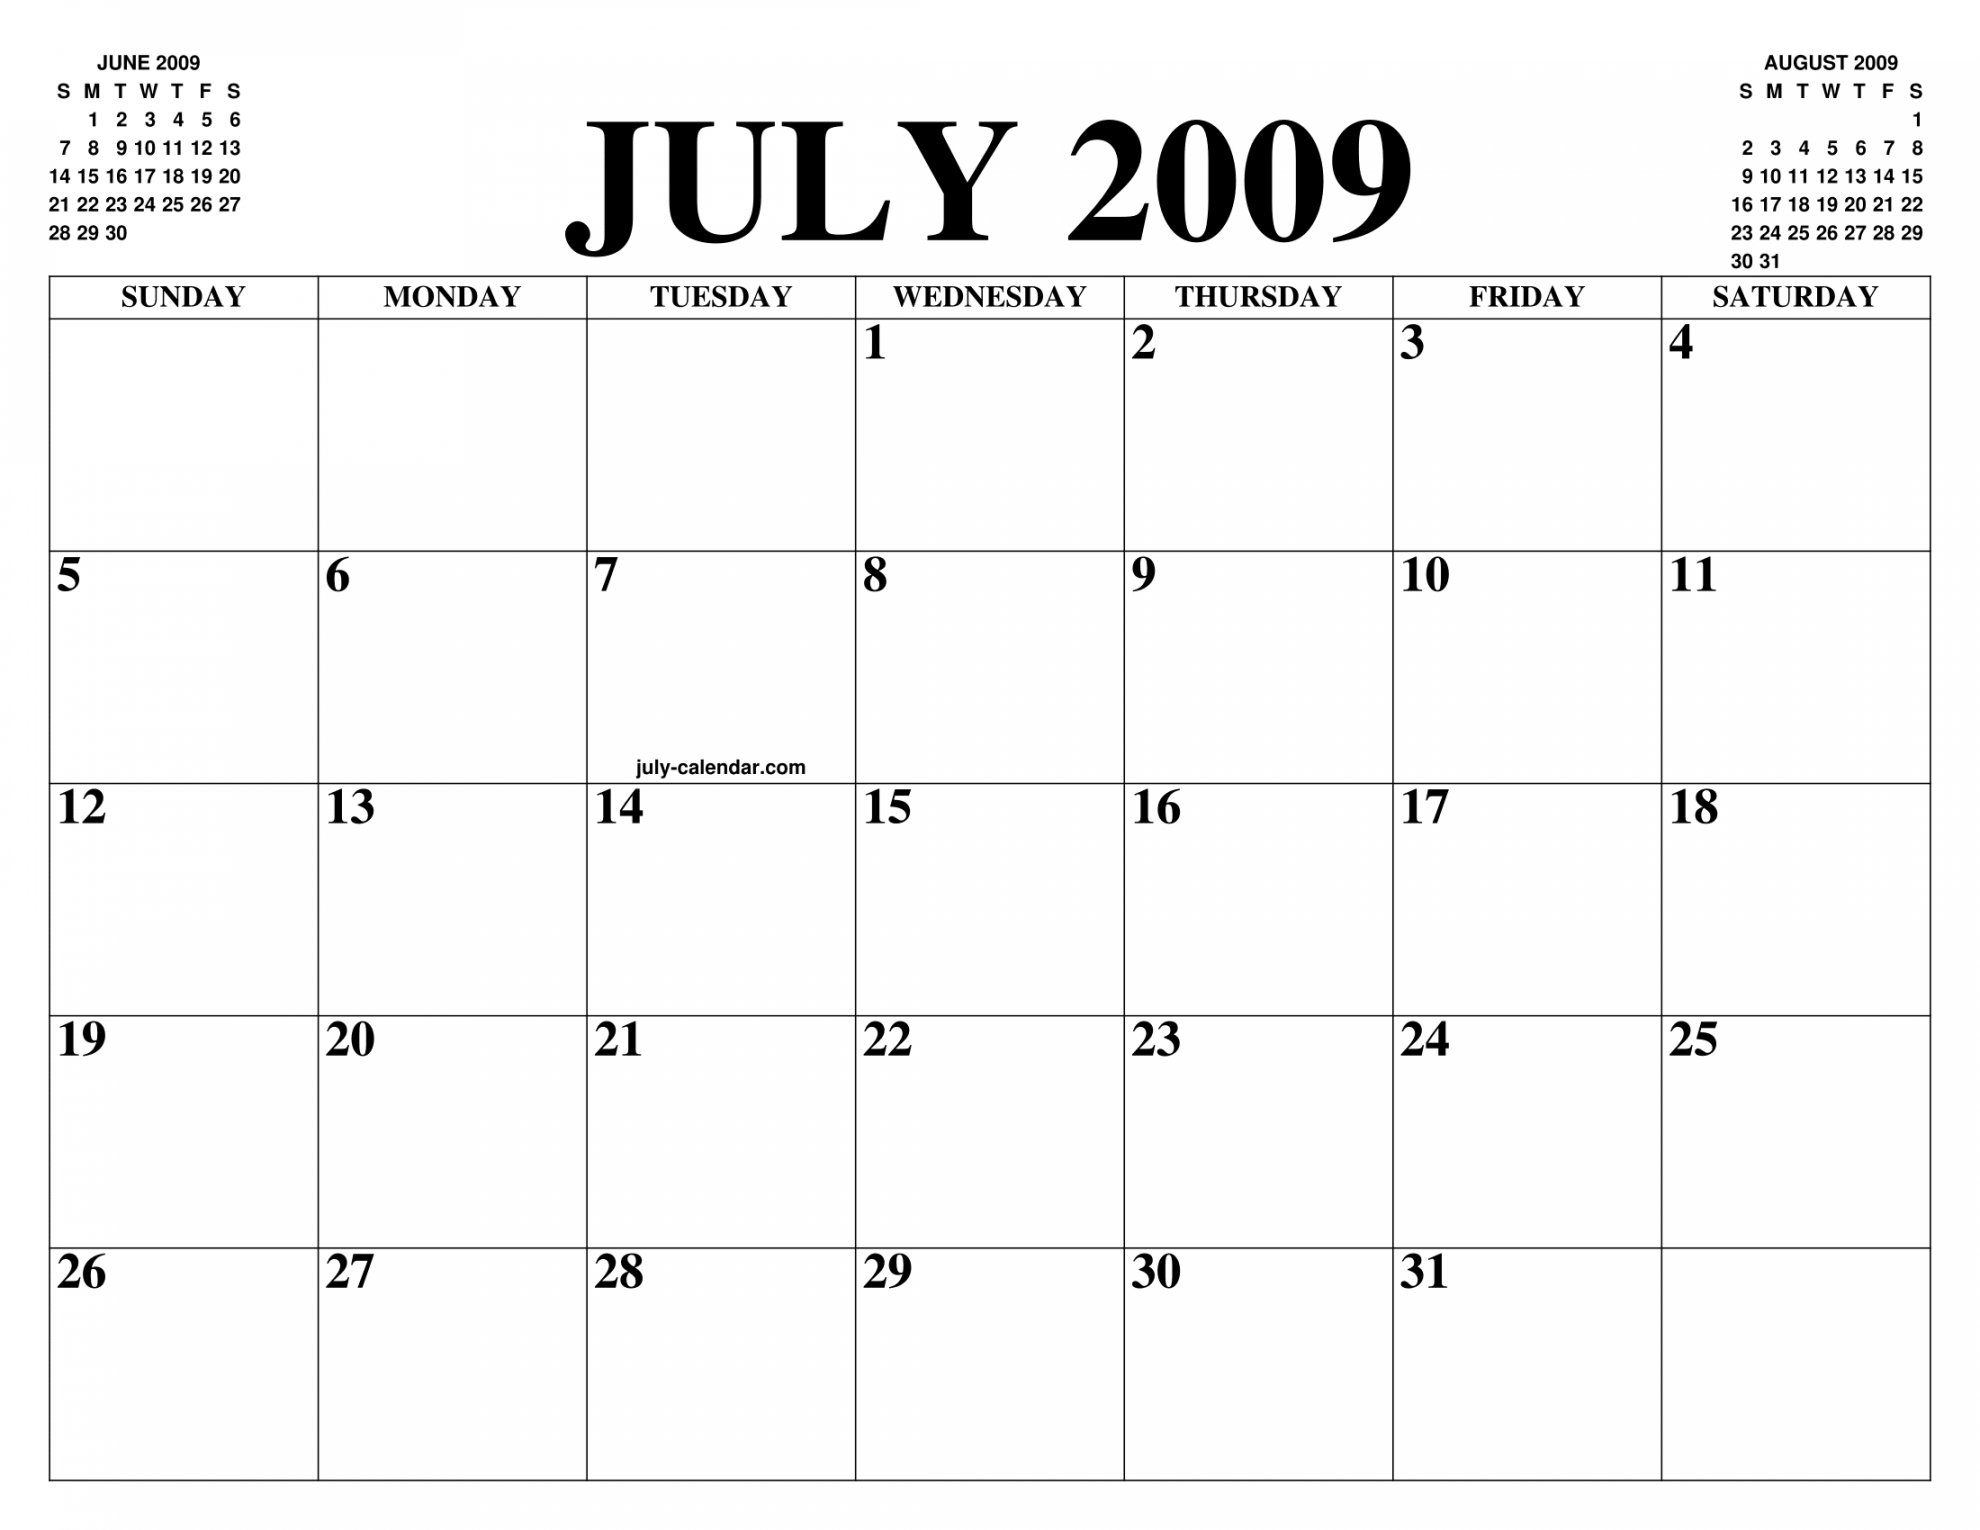 JULY  CALENDAR OF THE MONTH: FREE PRINTABLE JULY CALENDAR OF